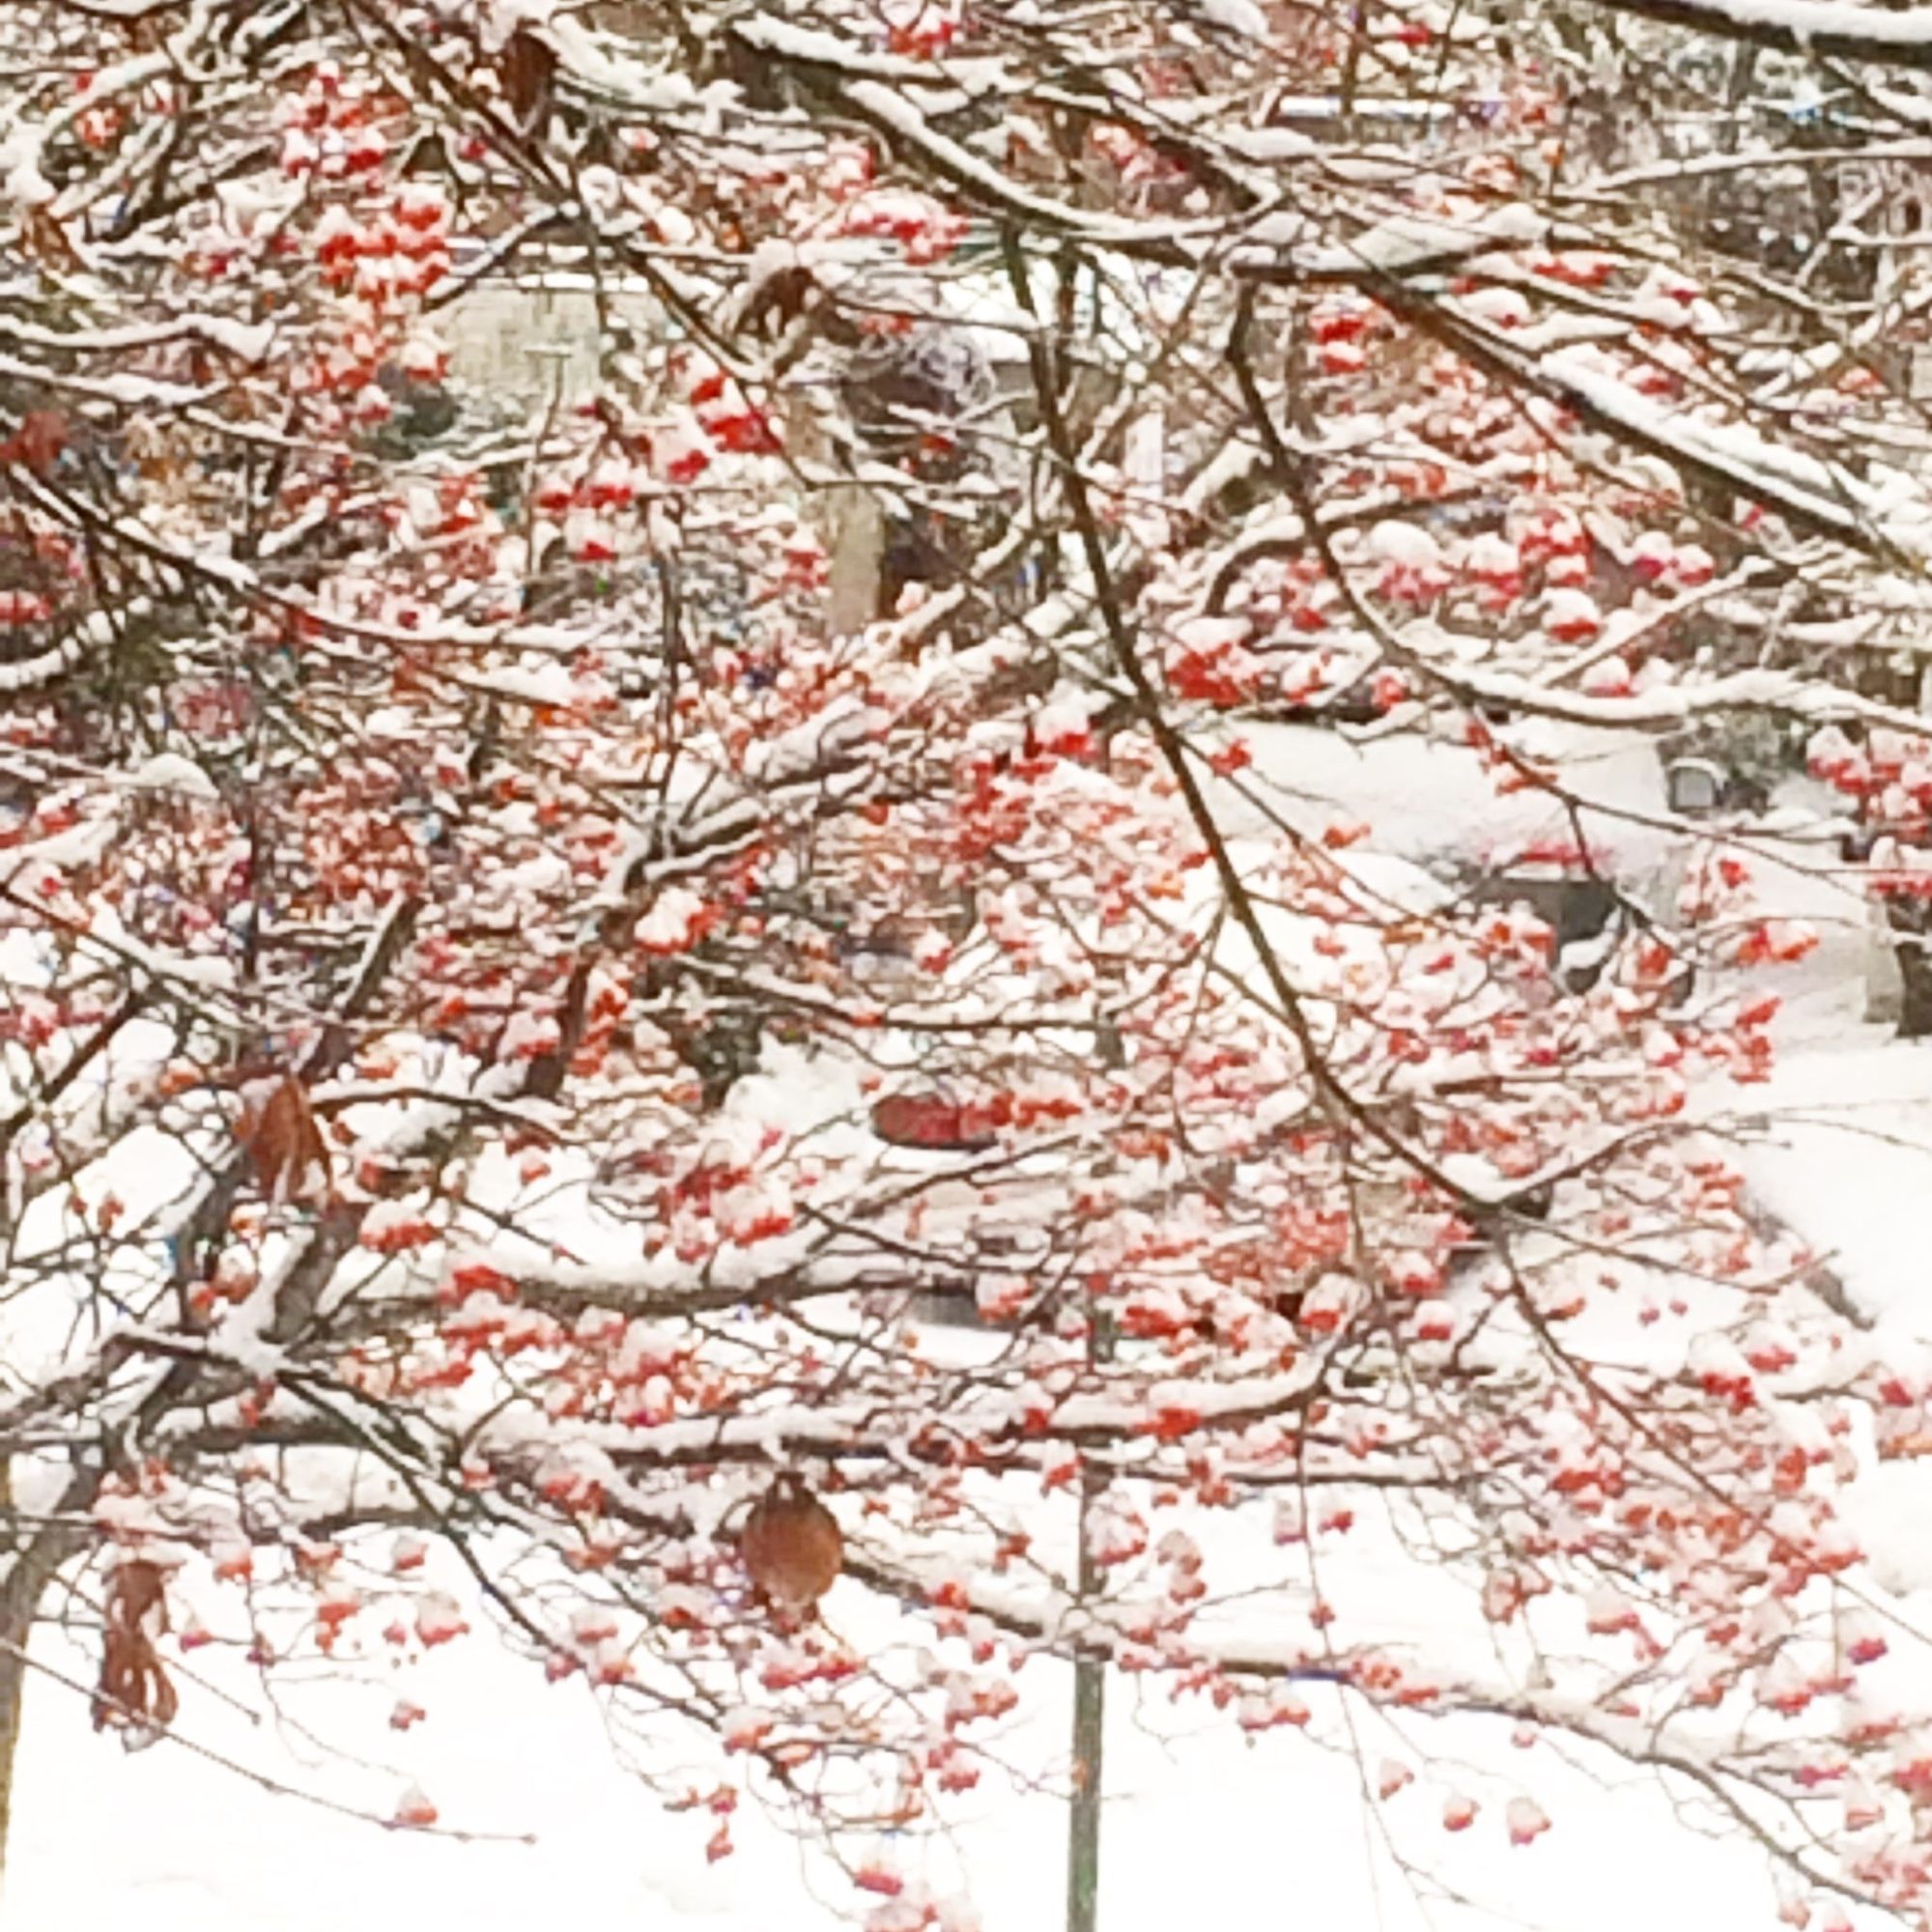 Winter’s Red